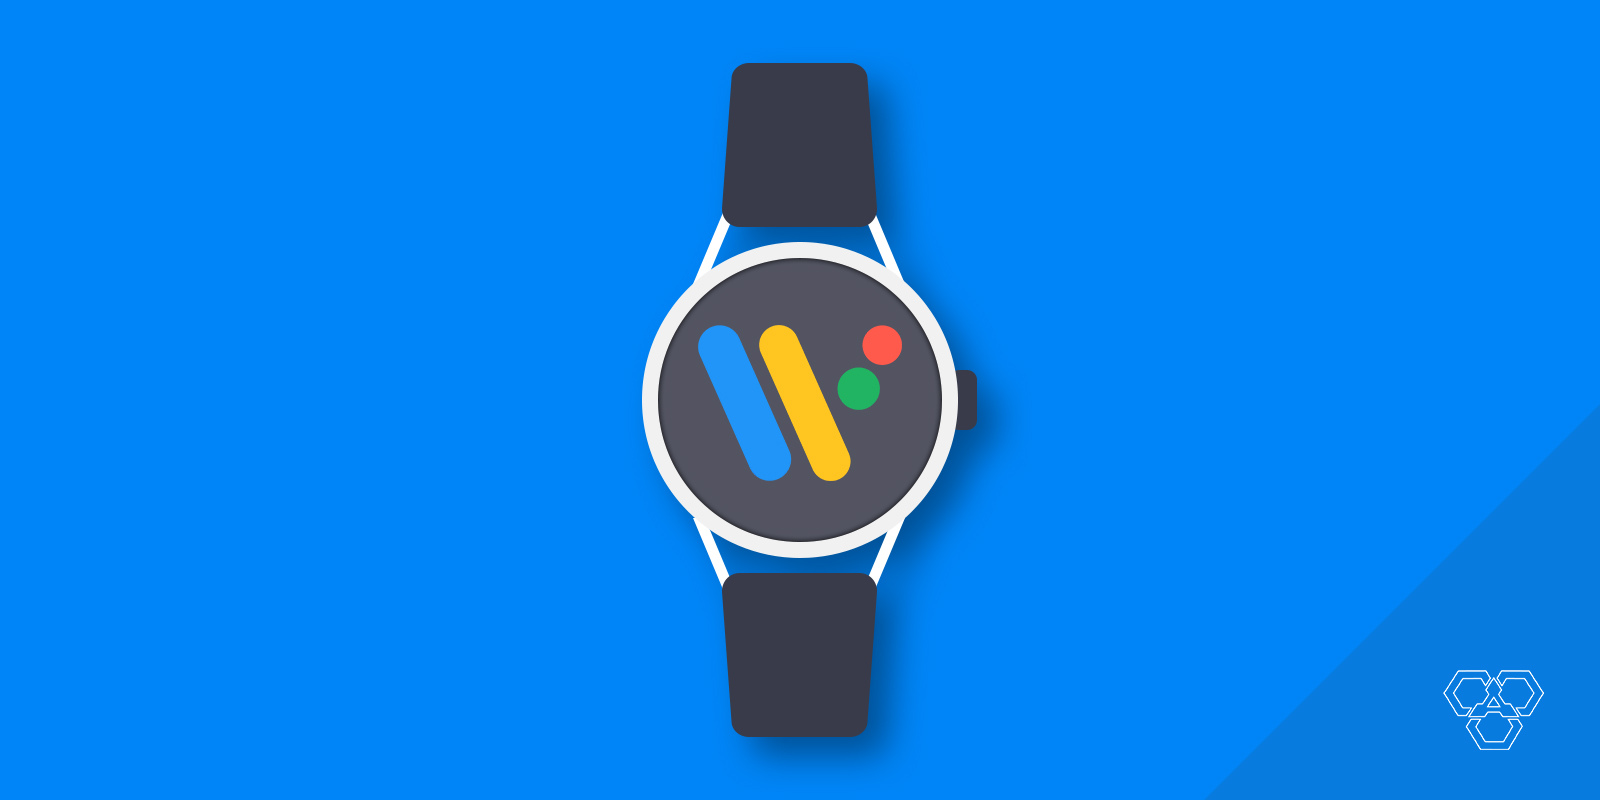 Google Wear Os Goes Up A Notch With New Tiles And Fit’s Exciting New Features